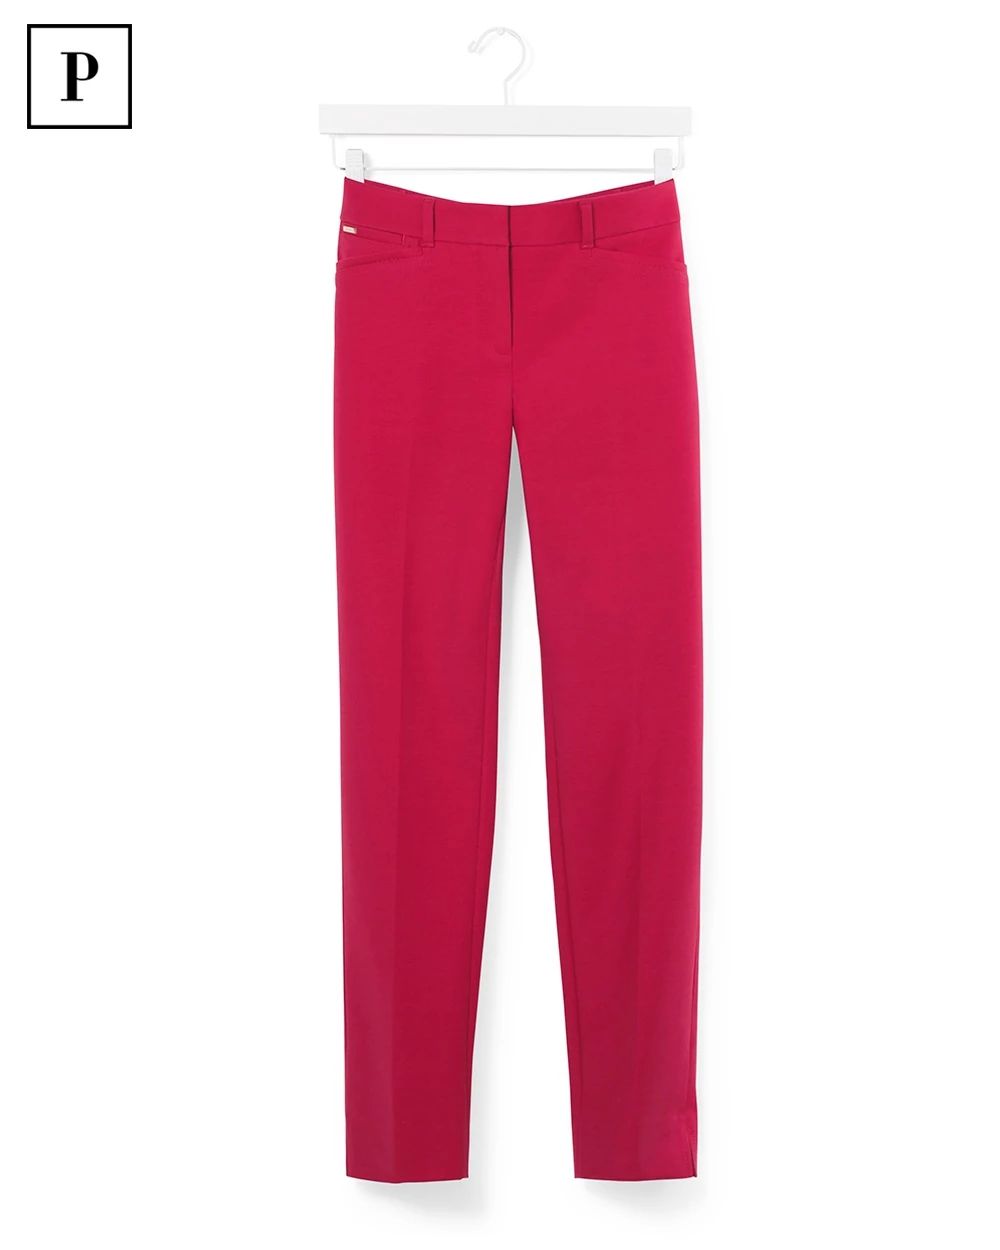 Petite Body-Defining Ankle-Grazing Pants